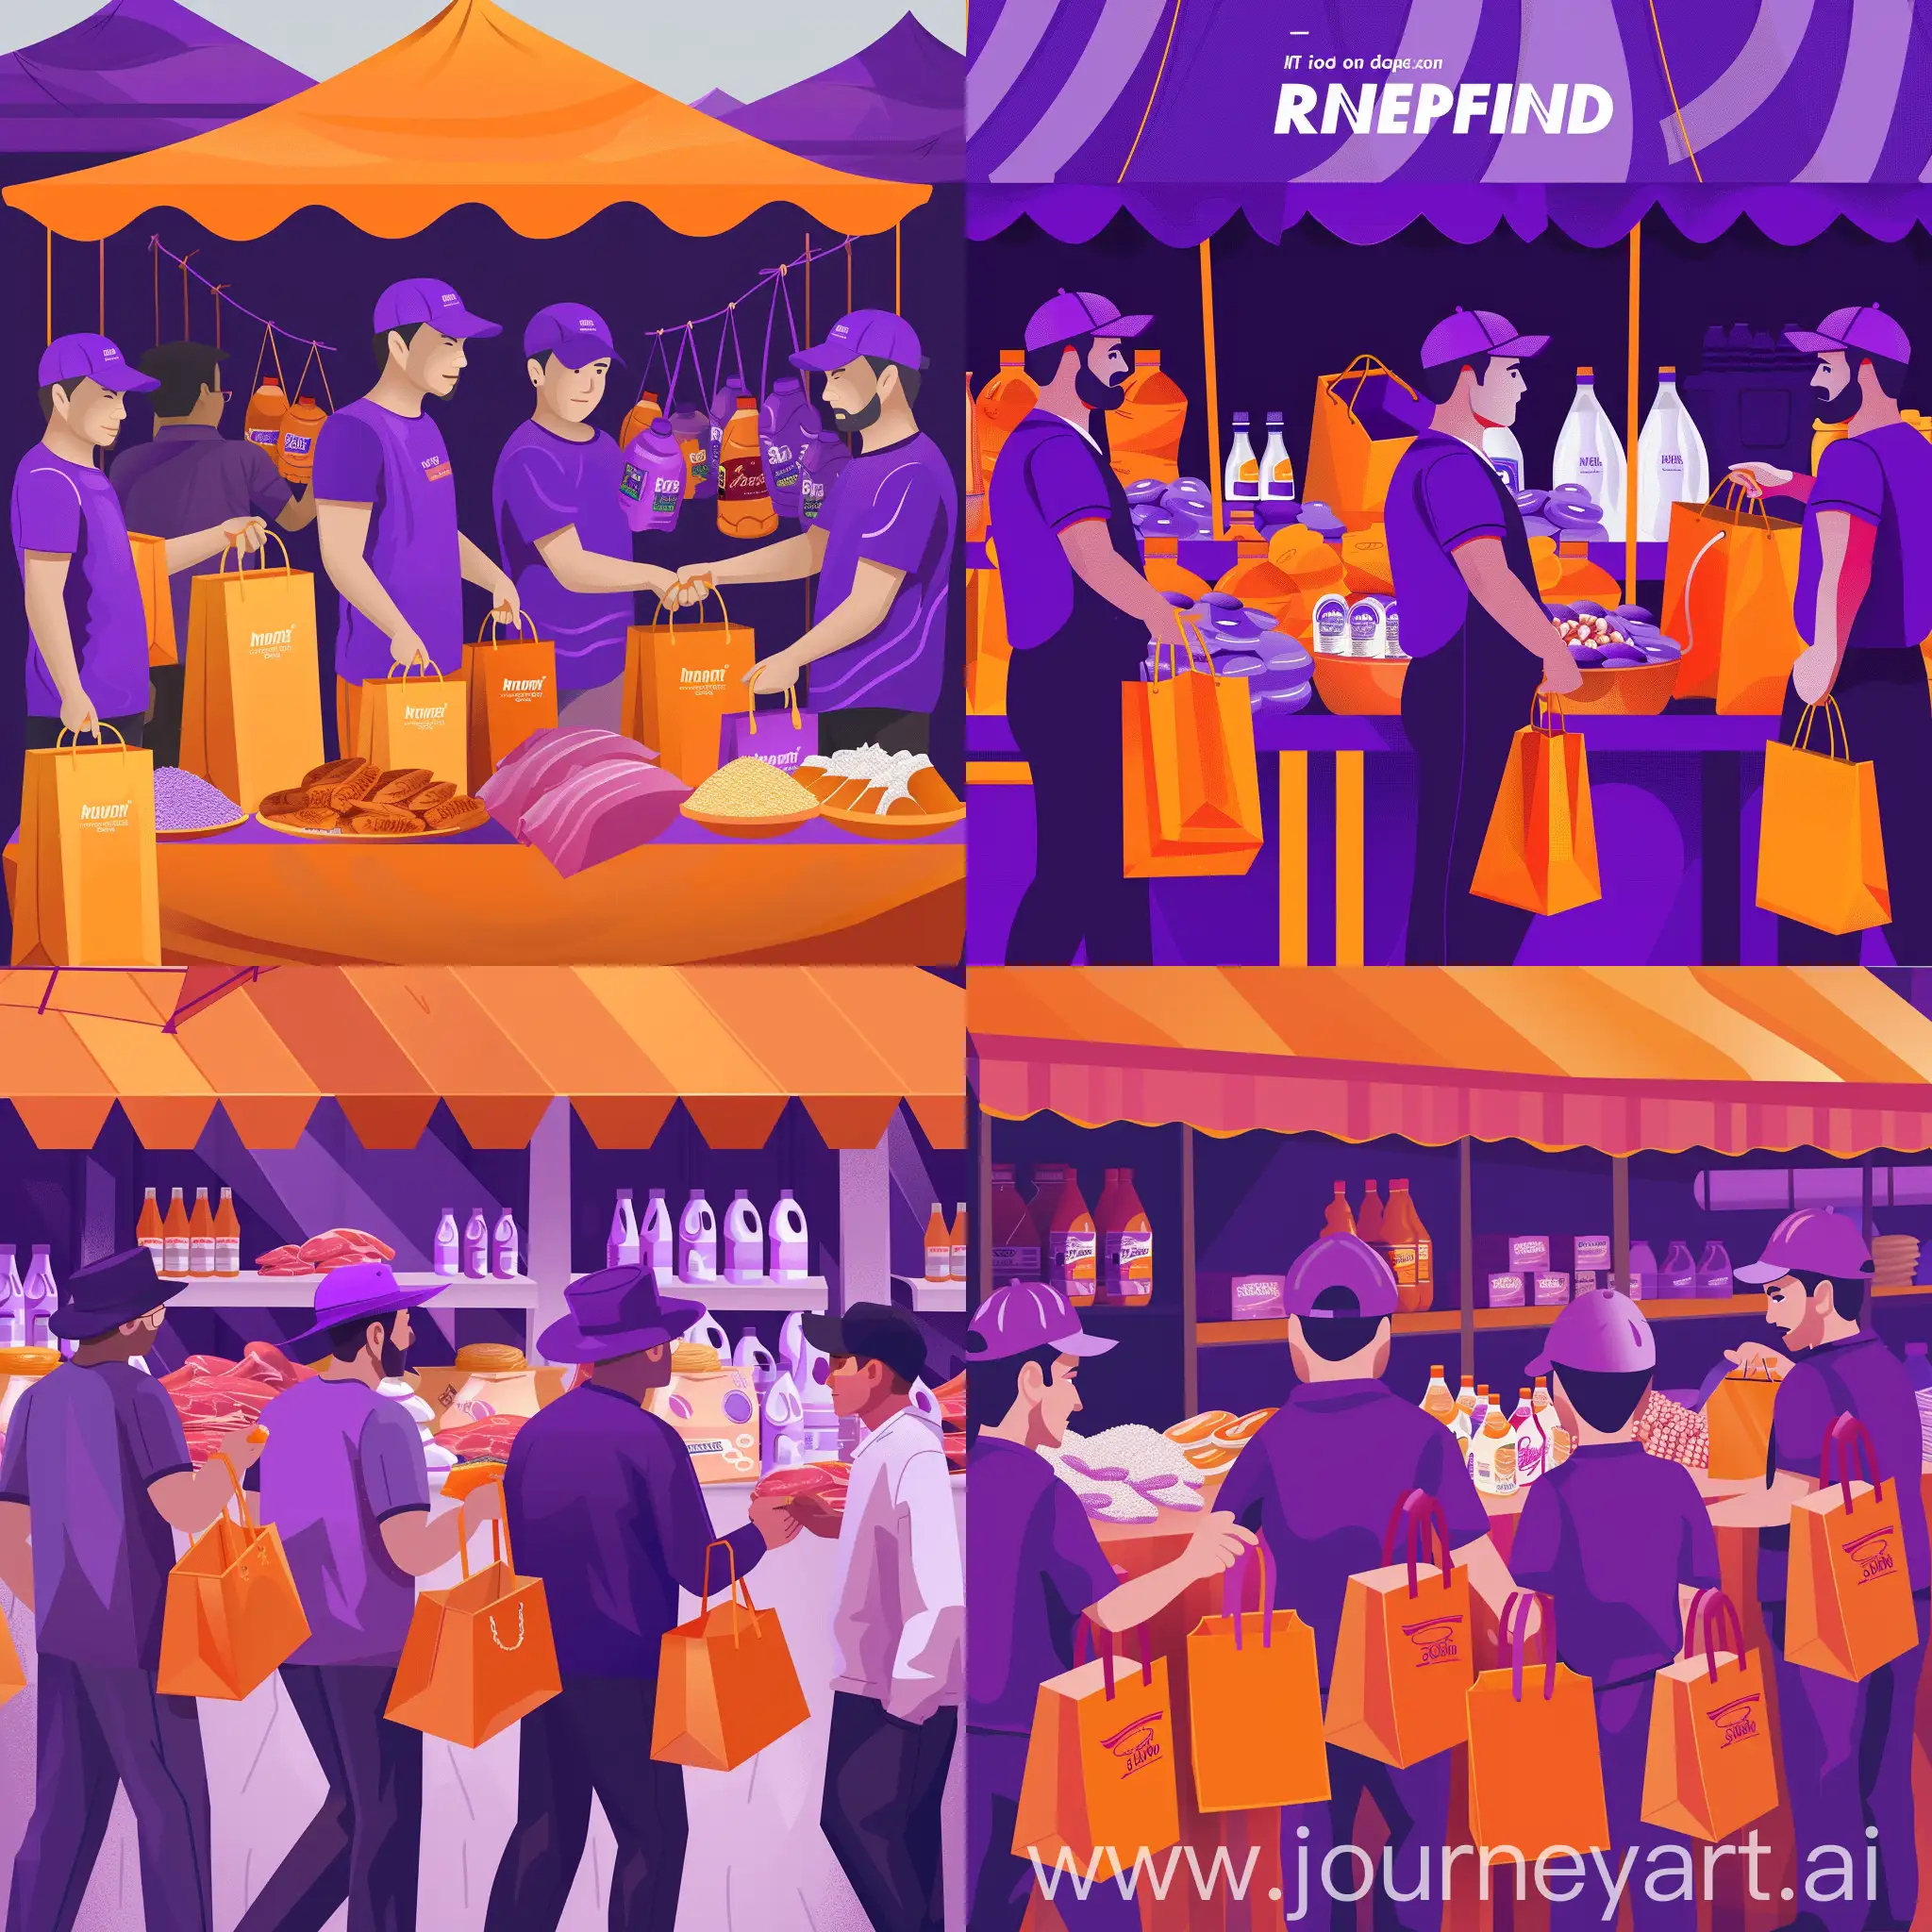 Men-in-Purple-Hats-Handing-Orange-Shopping-Bags-at-a-Colorful-Product-Booth